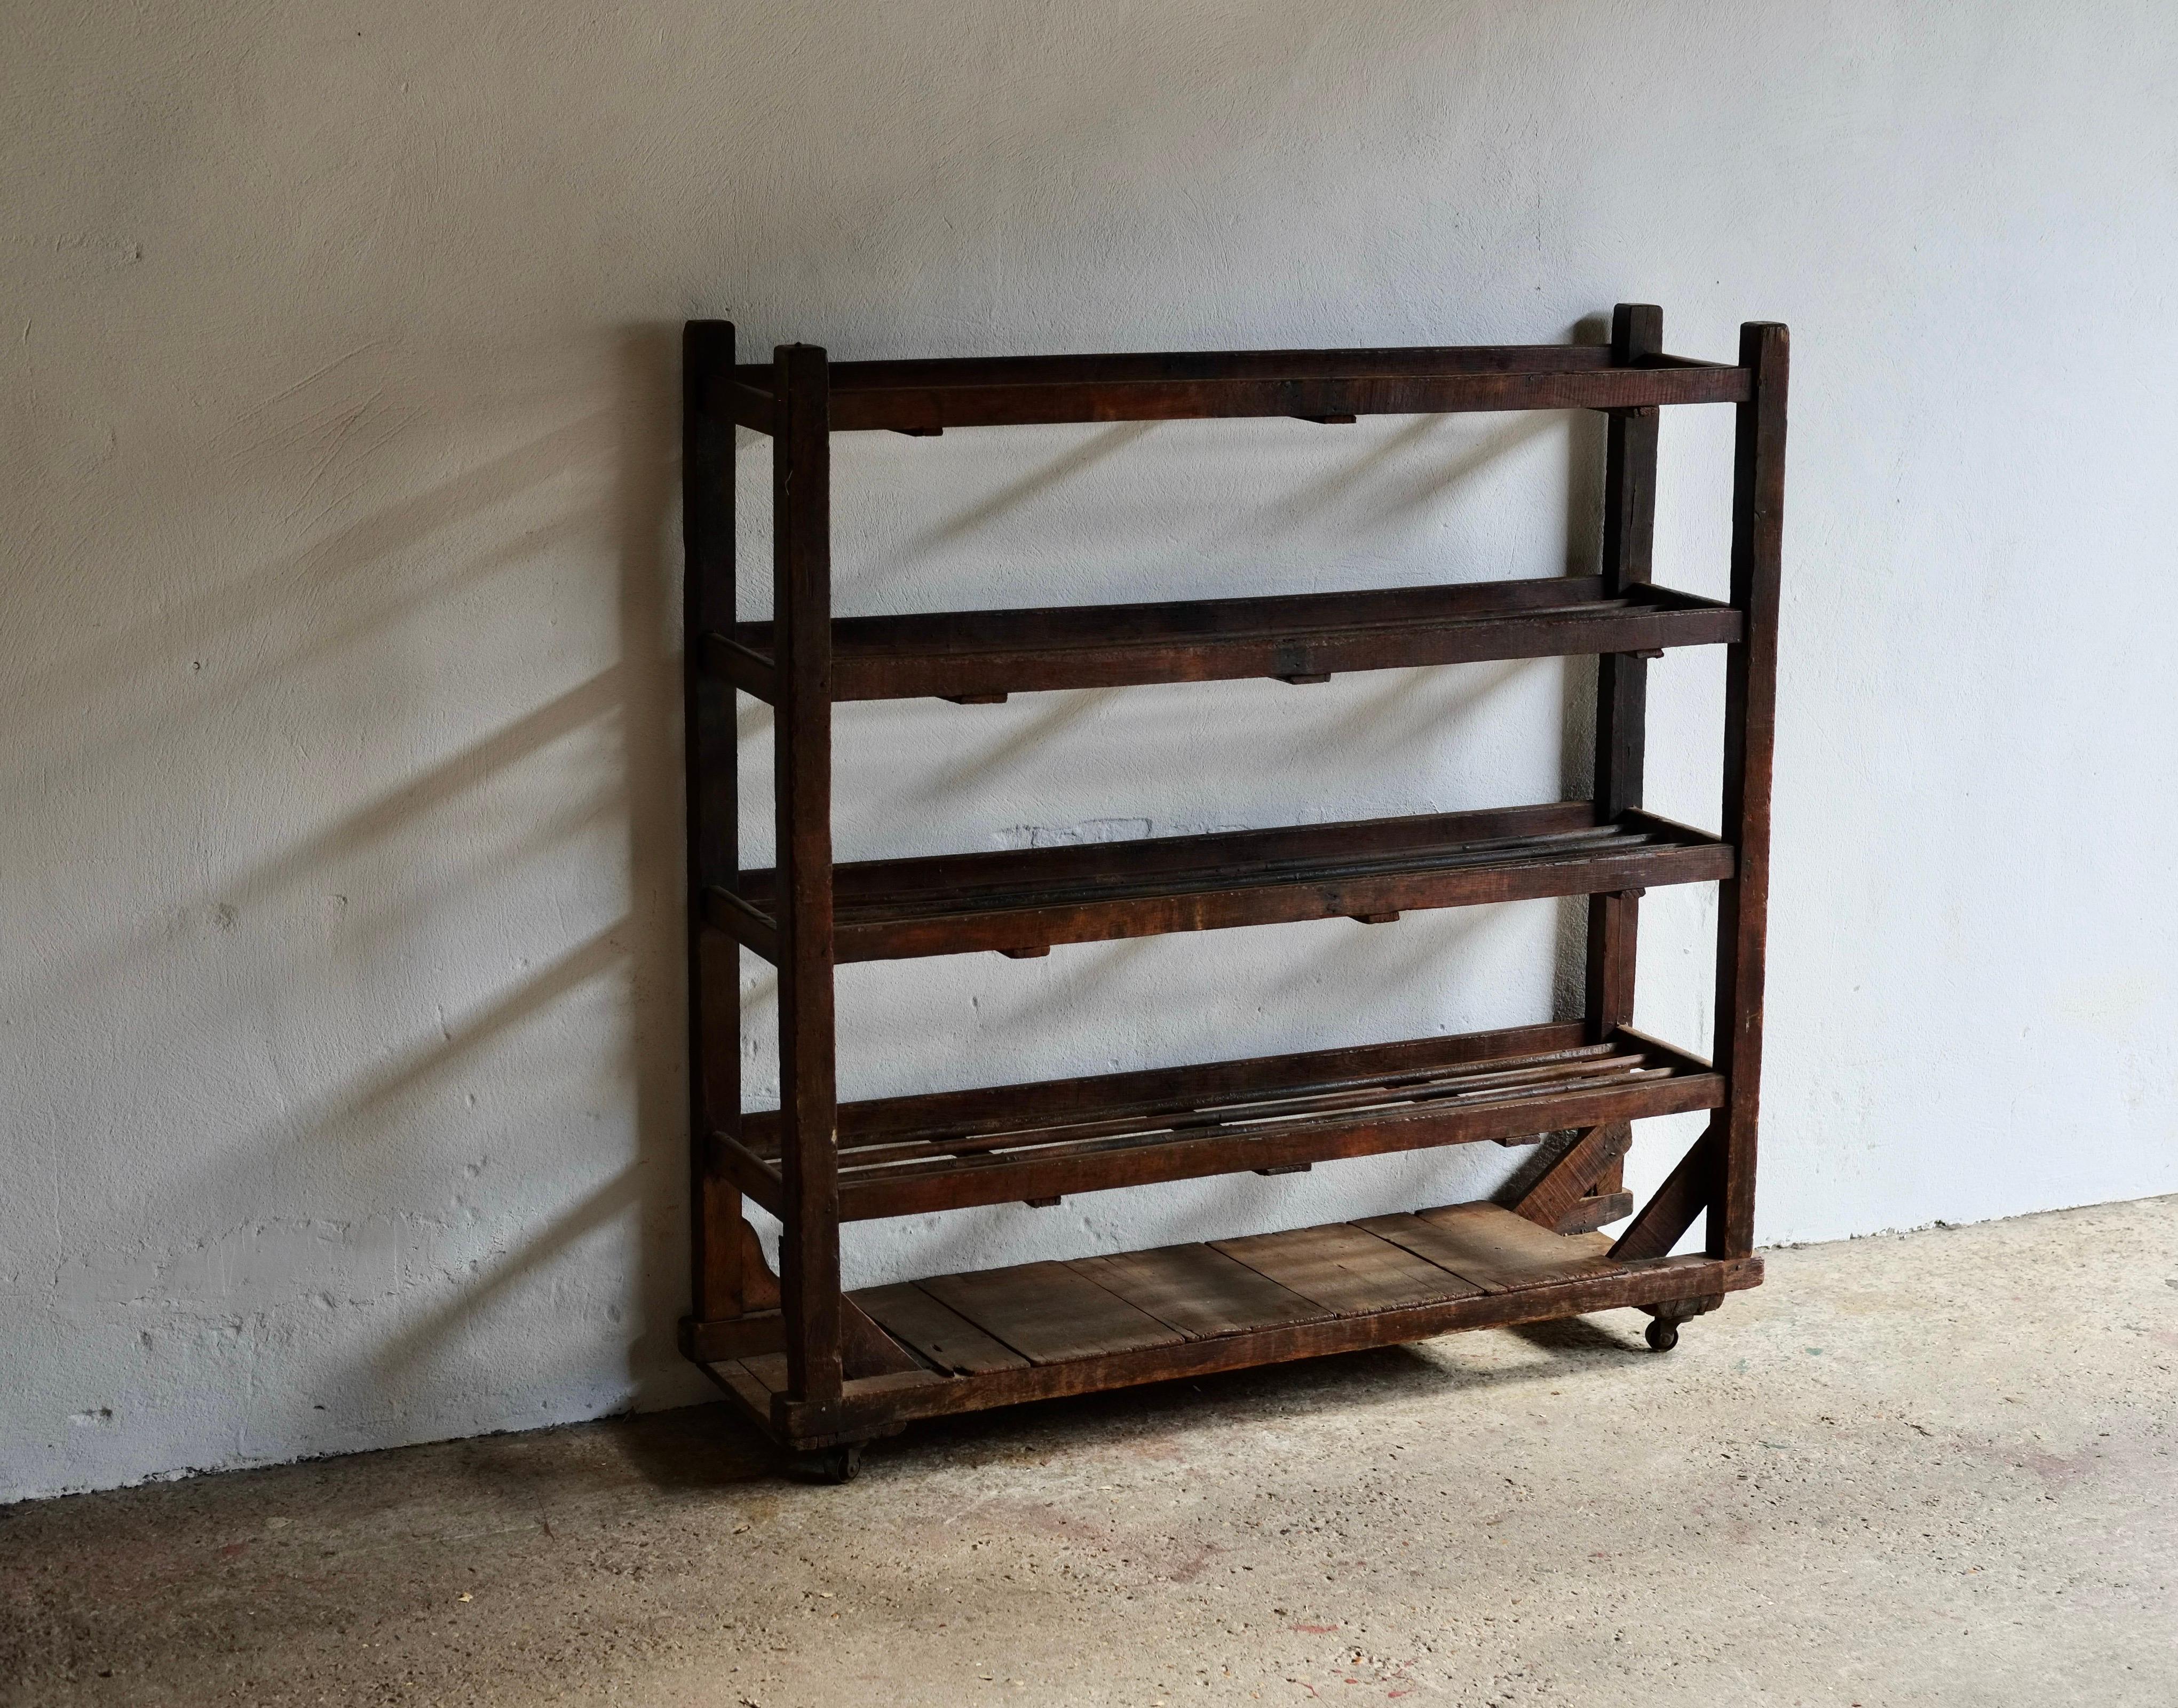 A rustic wooden French shelving unit featuring dowelled shelves raised on castors.